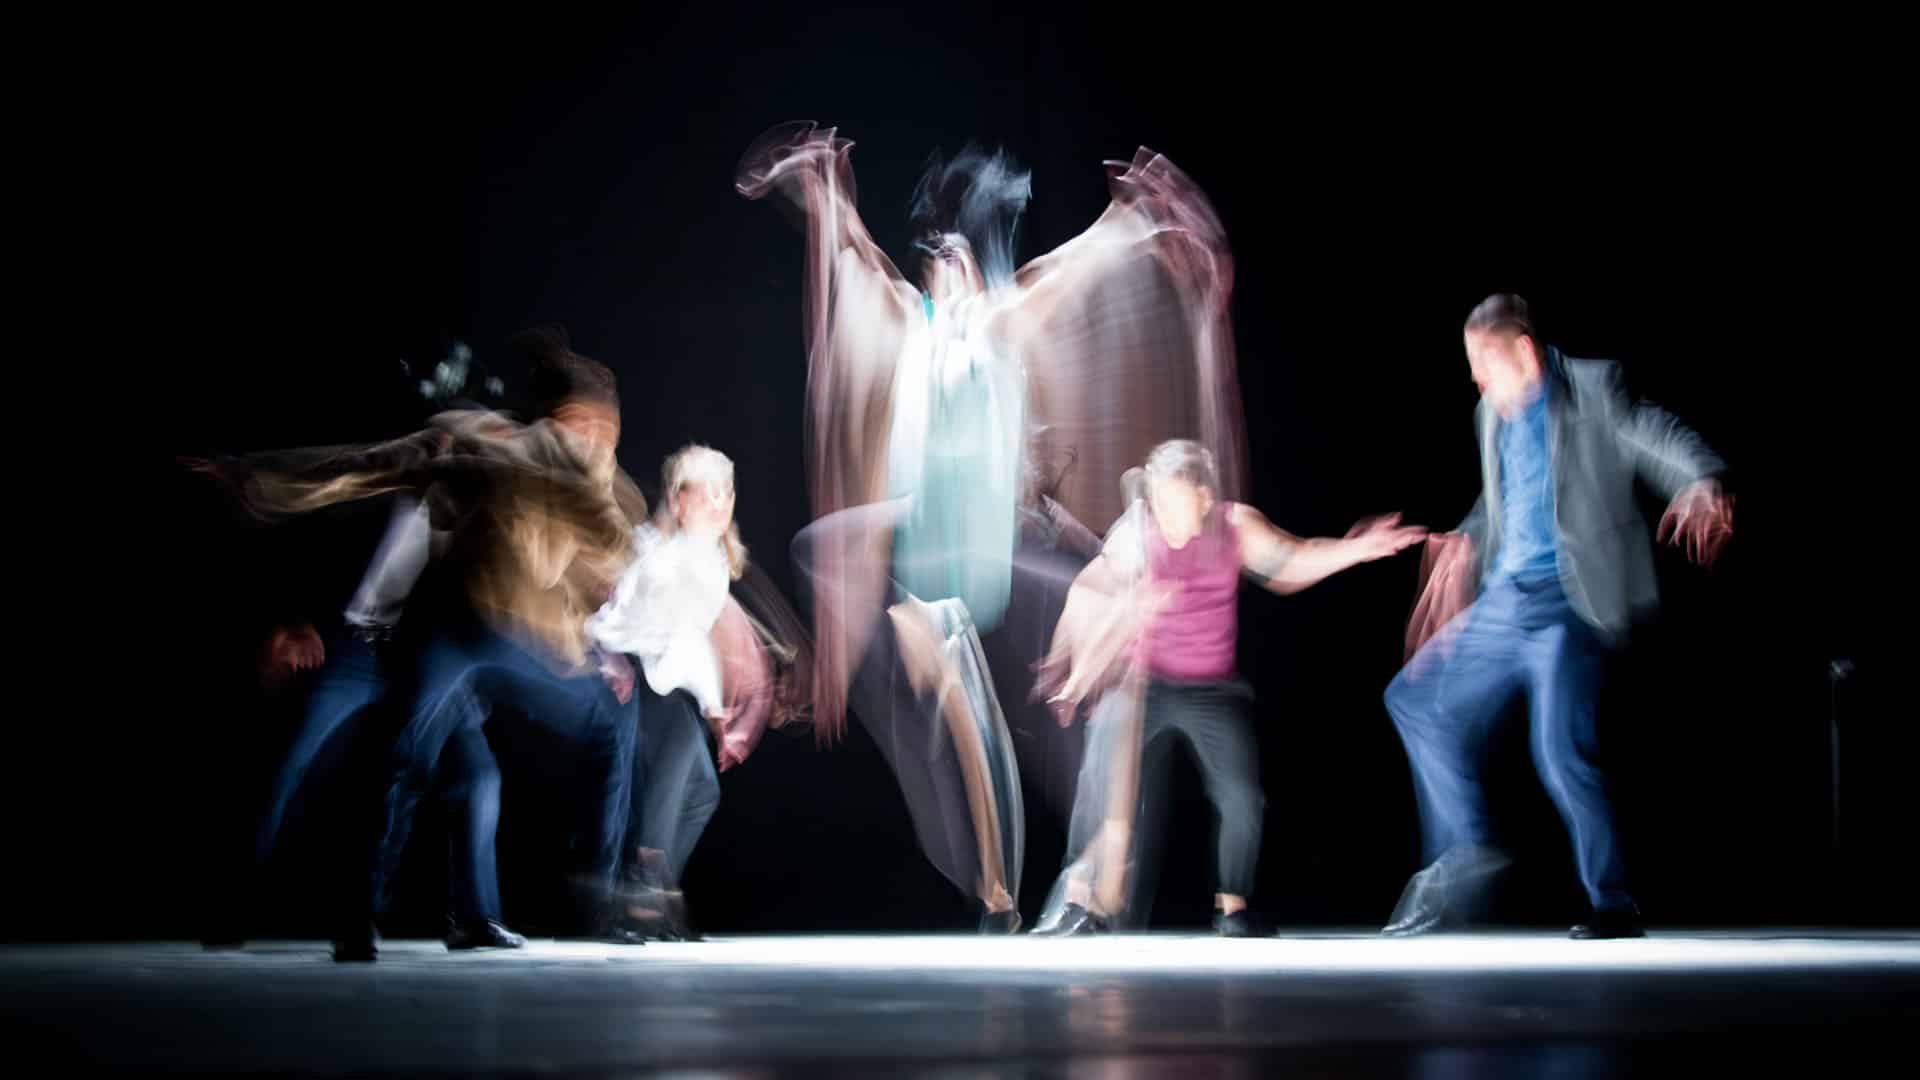 Long exposure photo of performers moving on stage